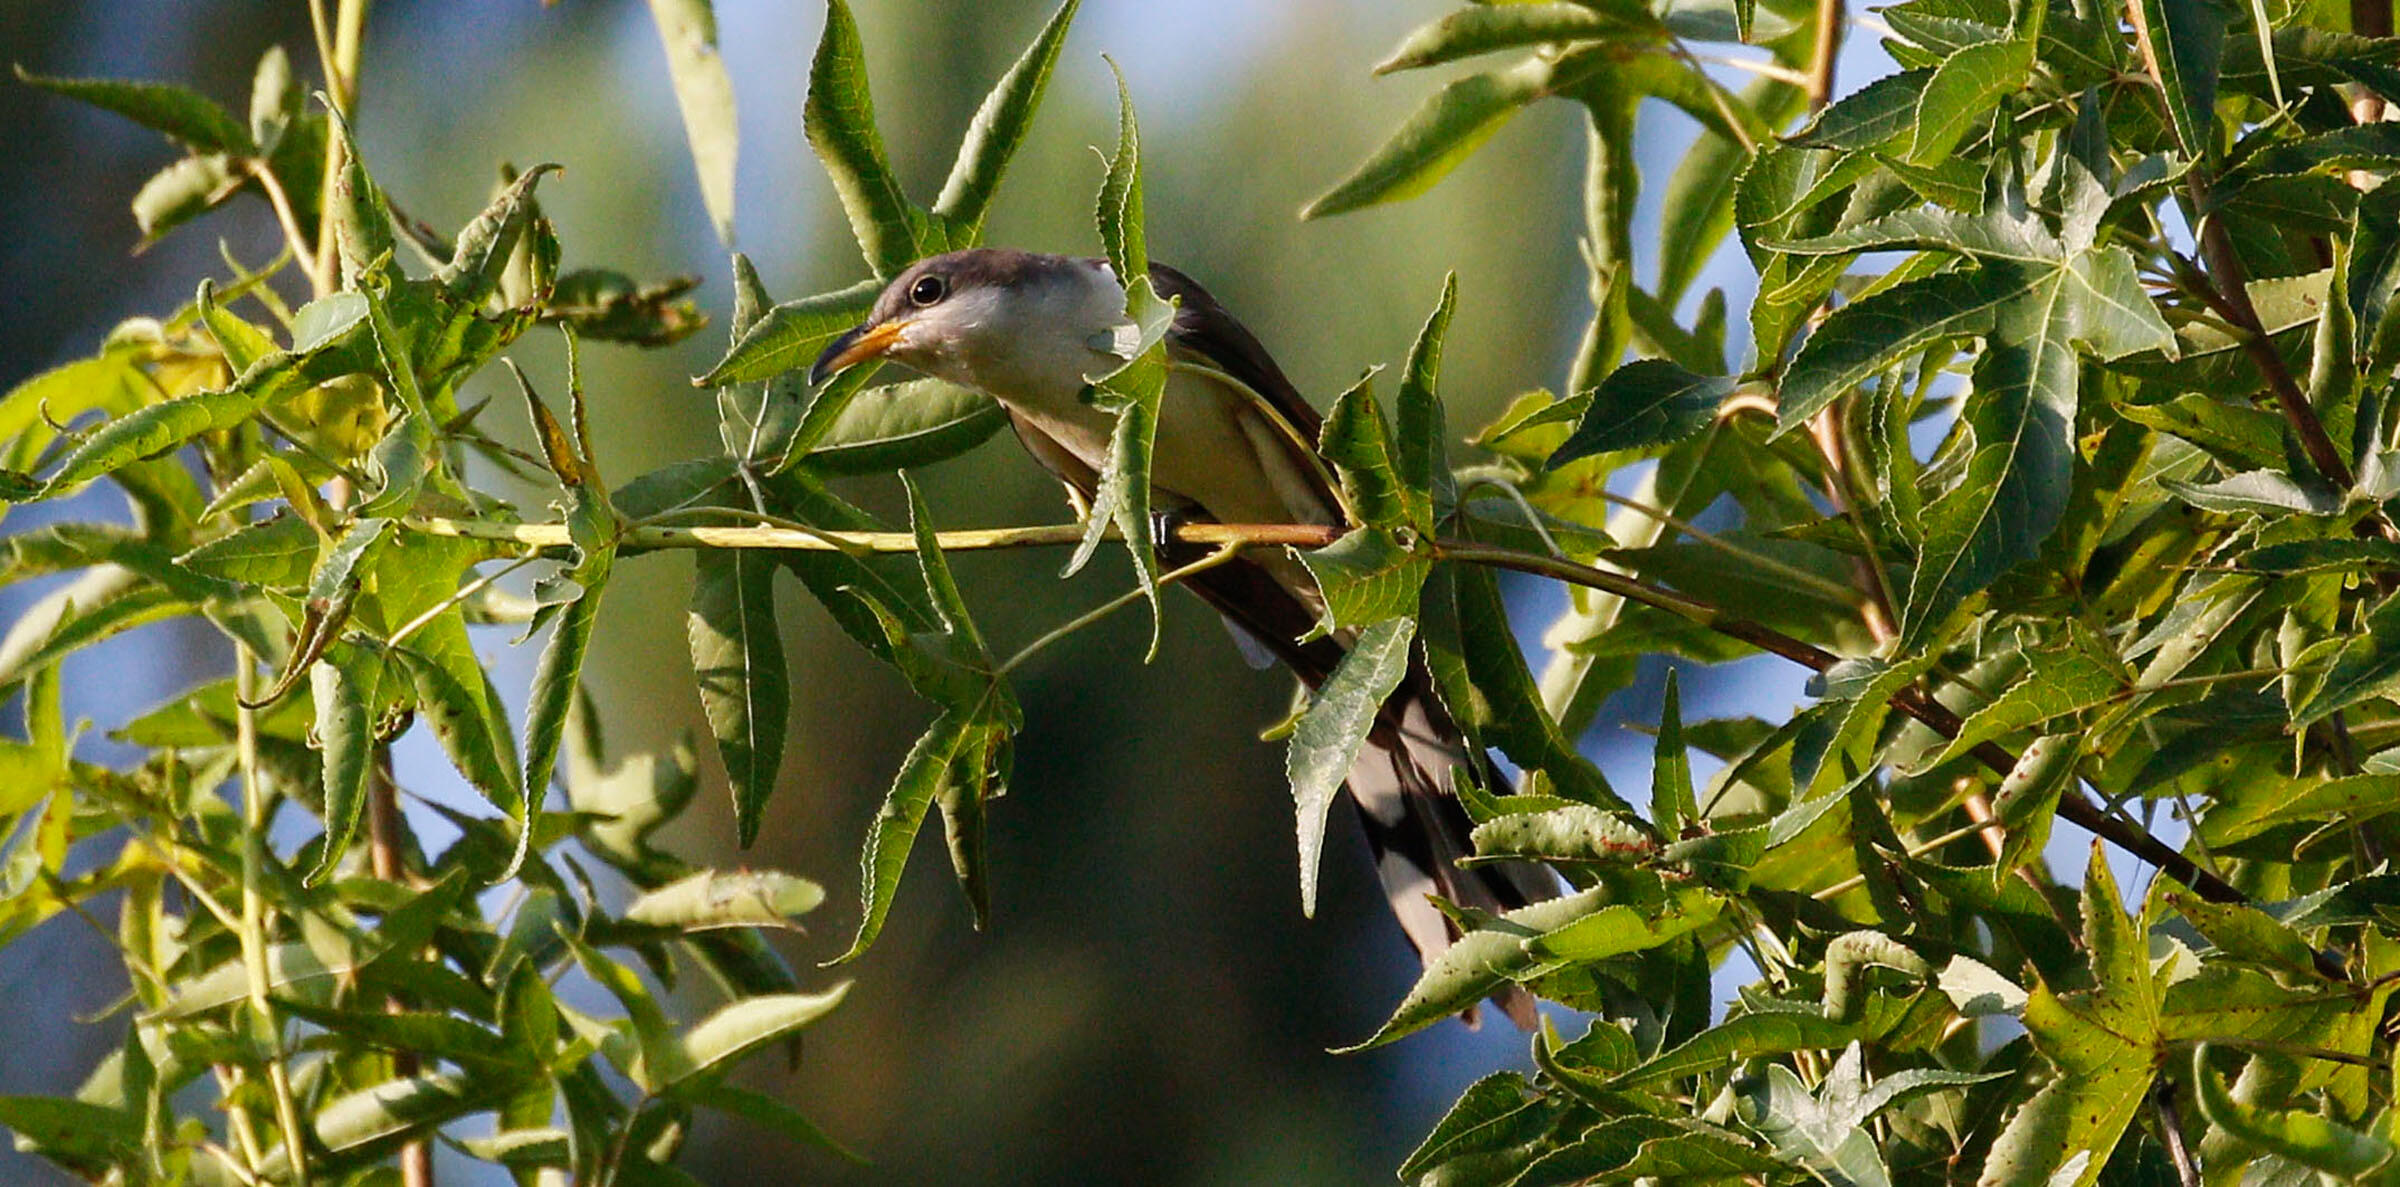 A Yellow-billed Cuckoo perches on a horizontal branch, its yellow eye-ring visible as it seemingly peers at the camera.